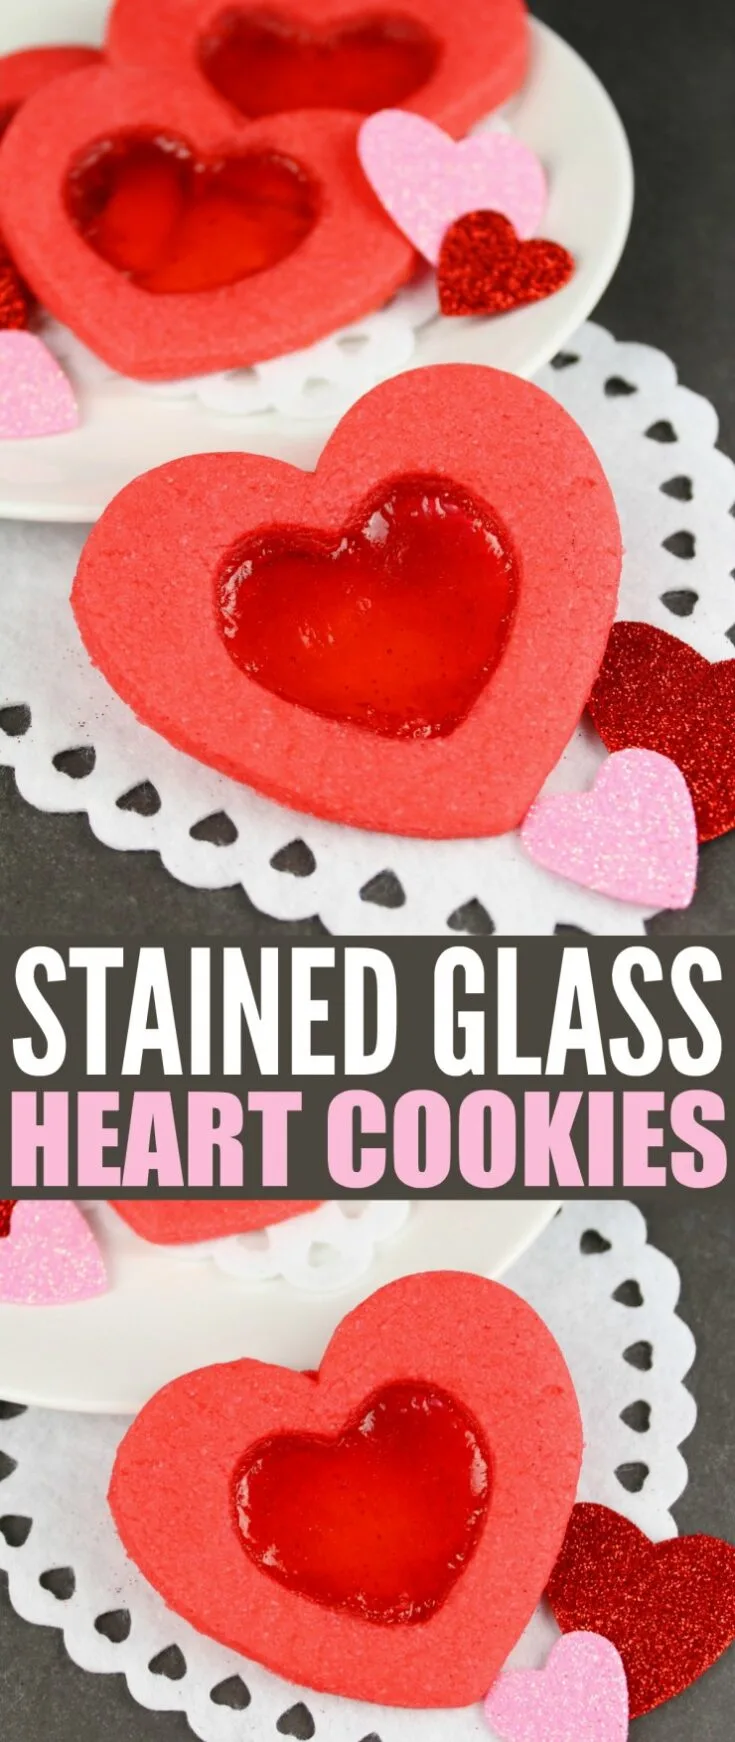 Stained Glass Heart Cookies